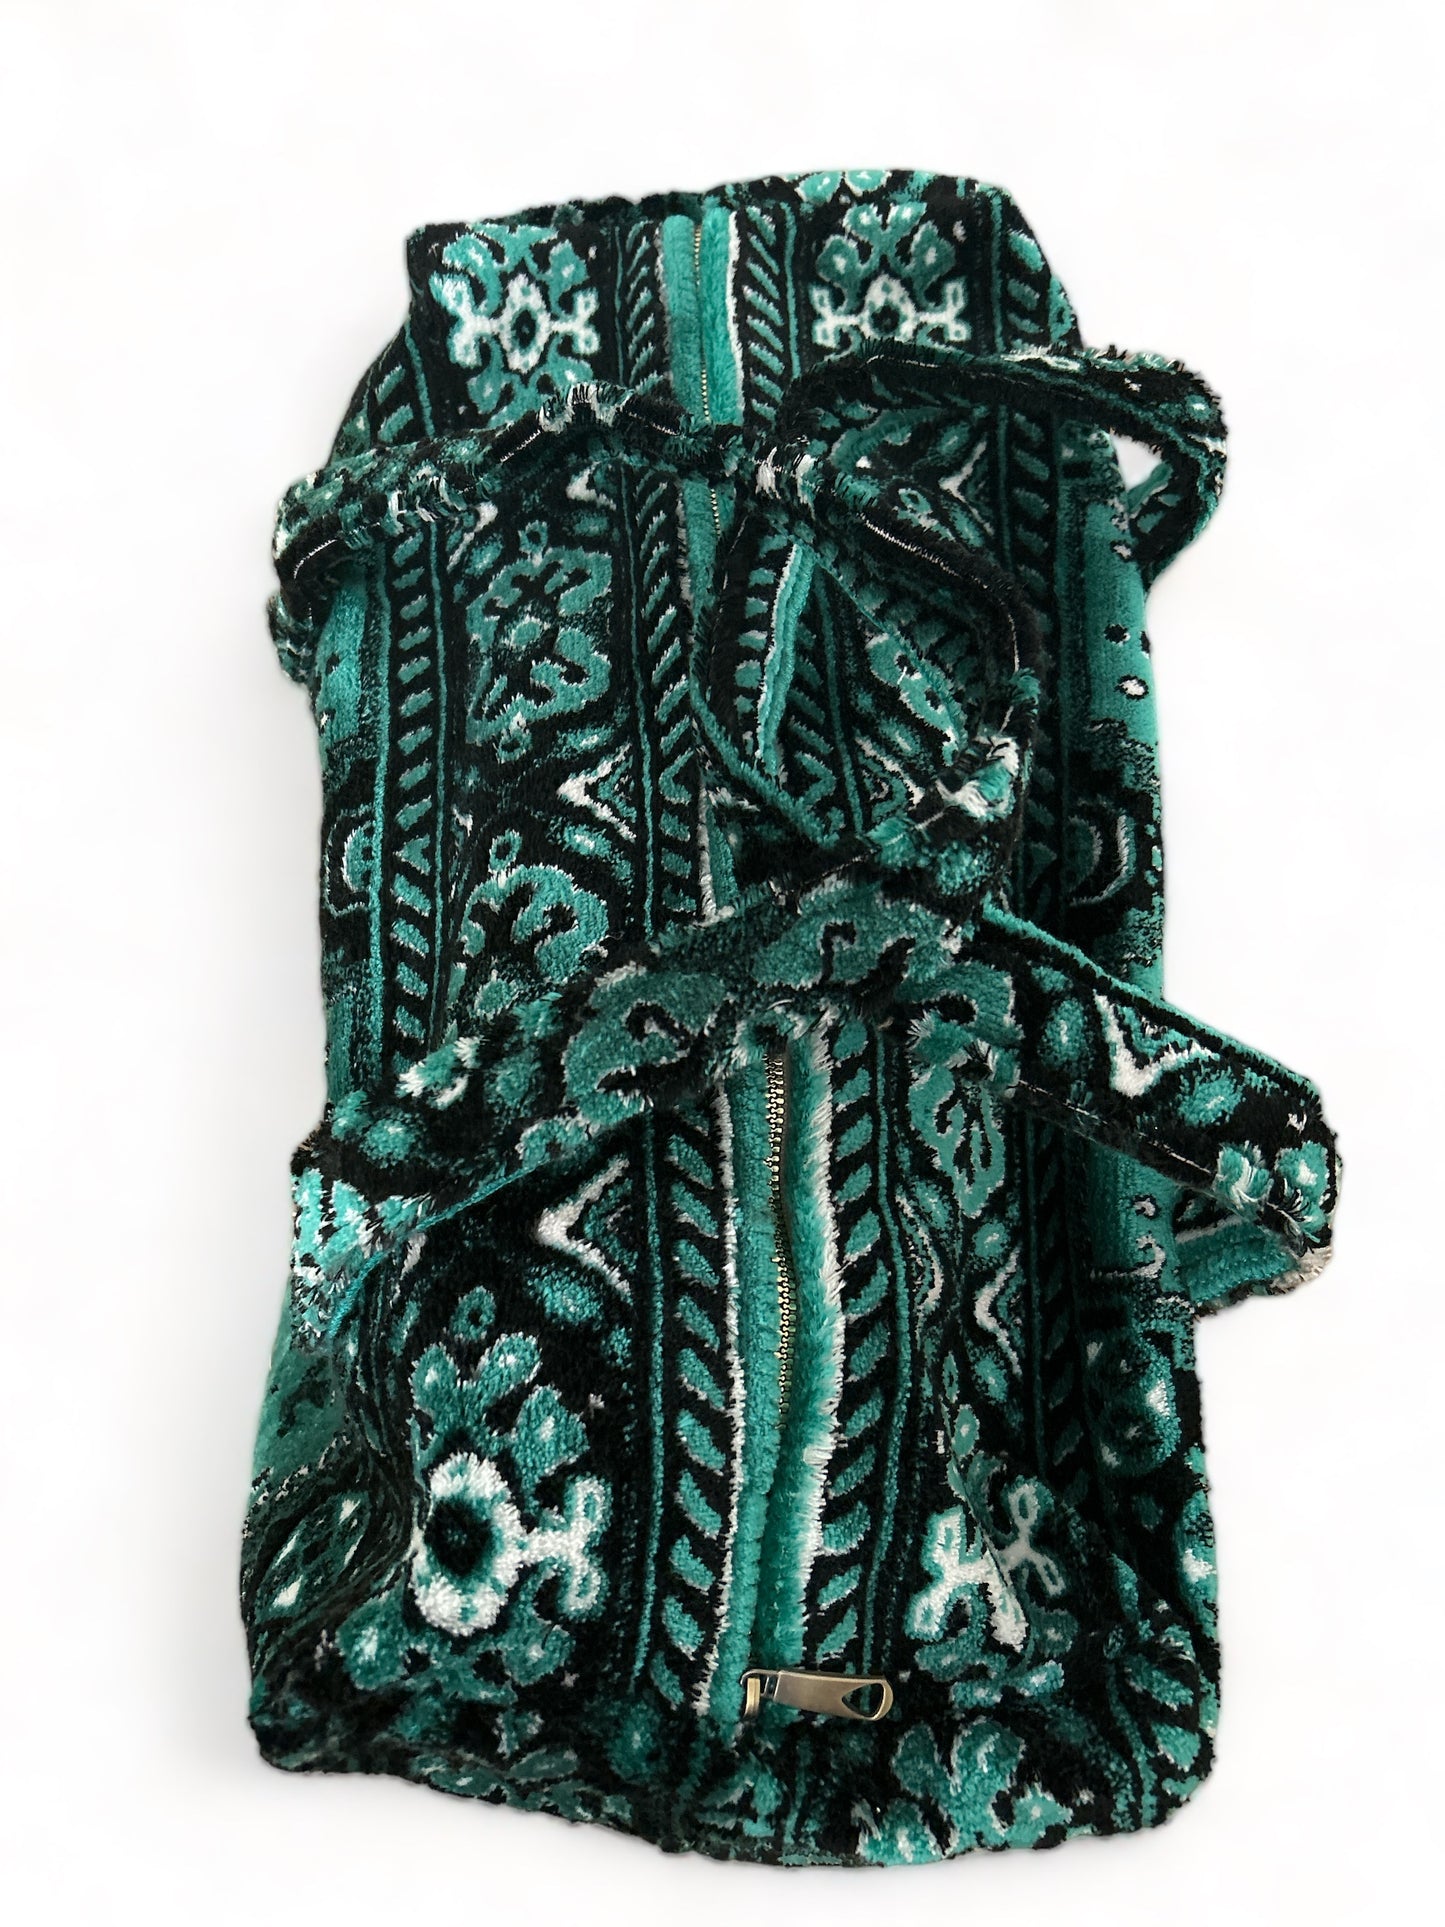 Weekend bag made of carpet fabric in turquoise color with black